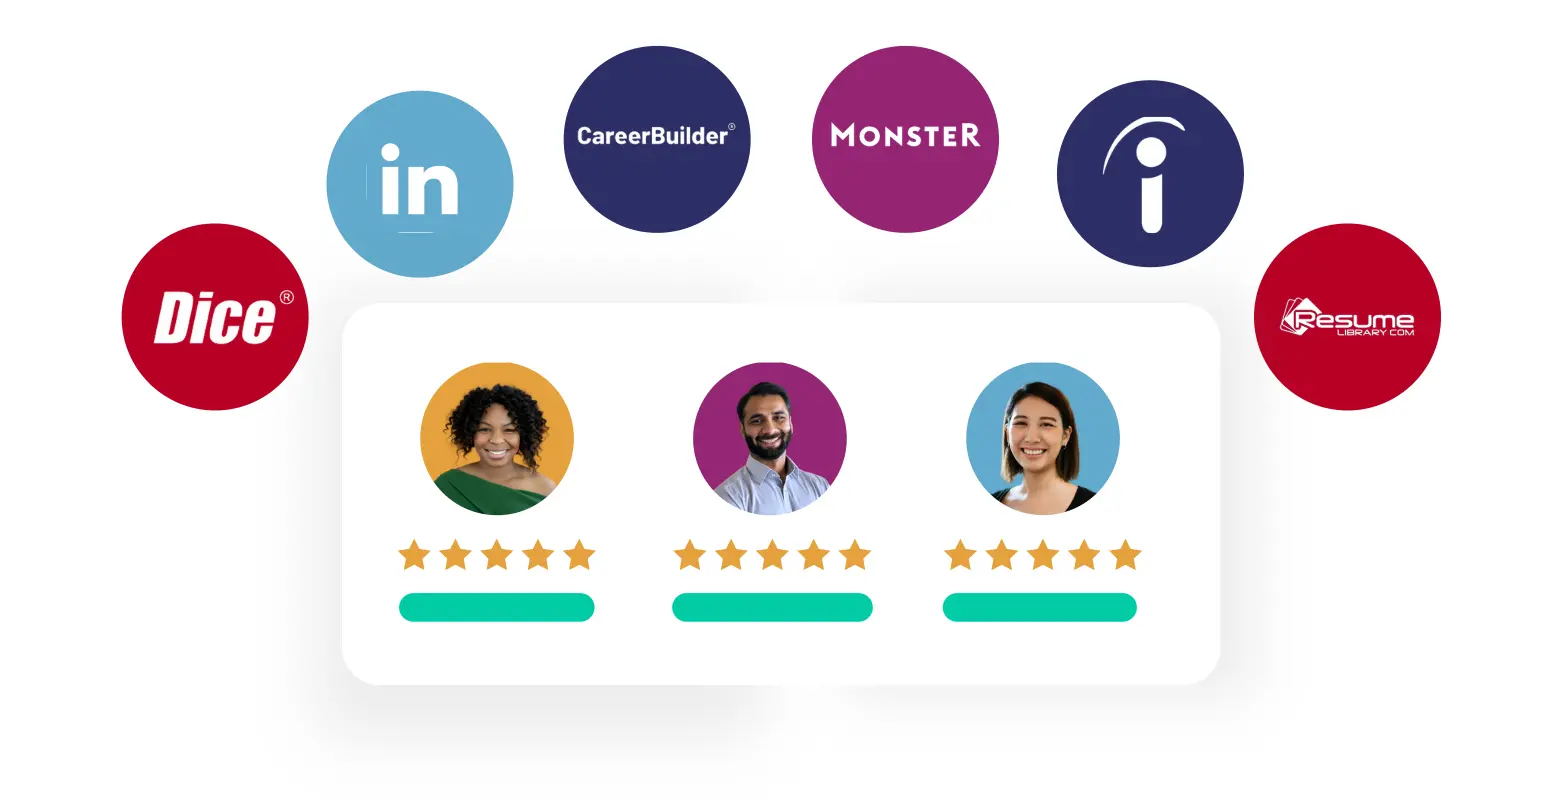 Illustration showing logos of job search platforms LinkedIn, CareerBuilder, Monster, Indeed, Dice, and Resume Library above a row of three individuals with five-star ratings below their images, indicating positive feedback.